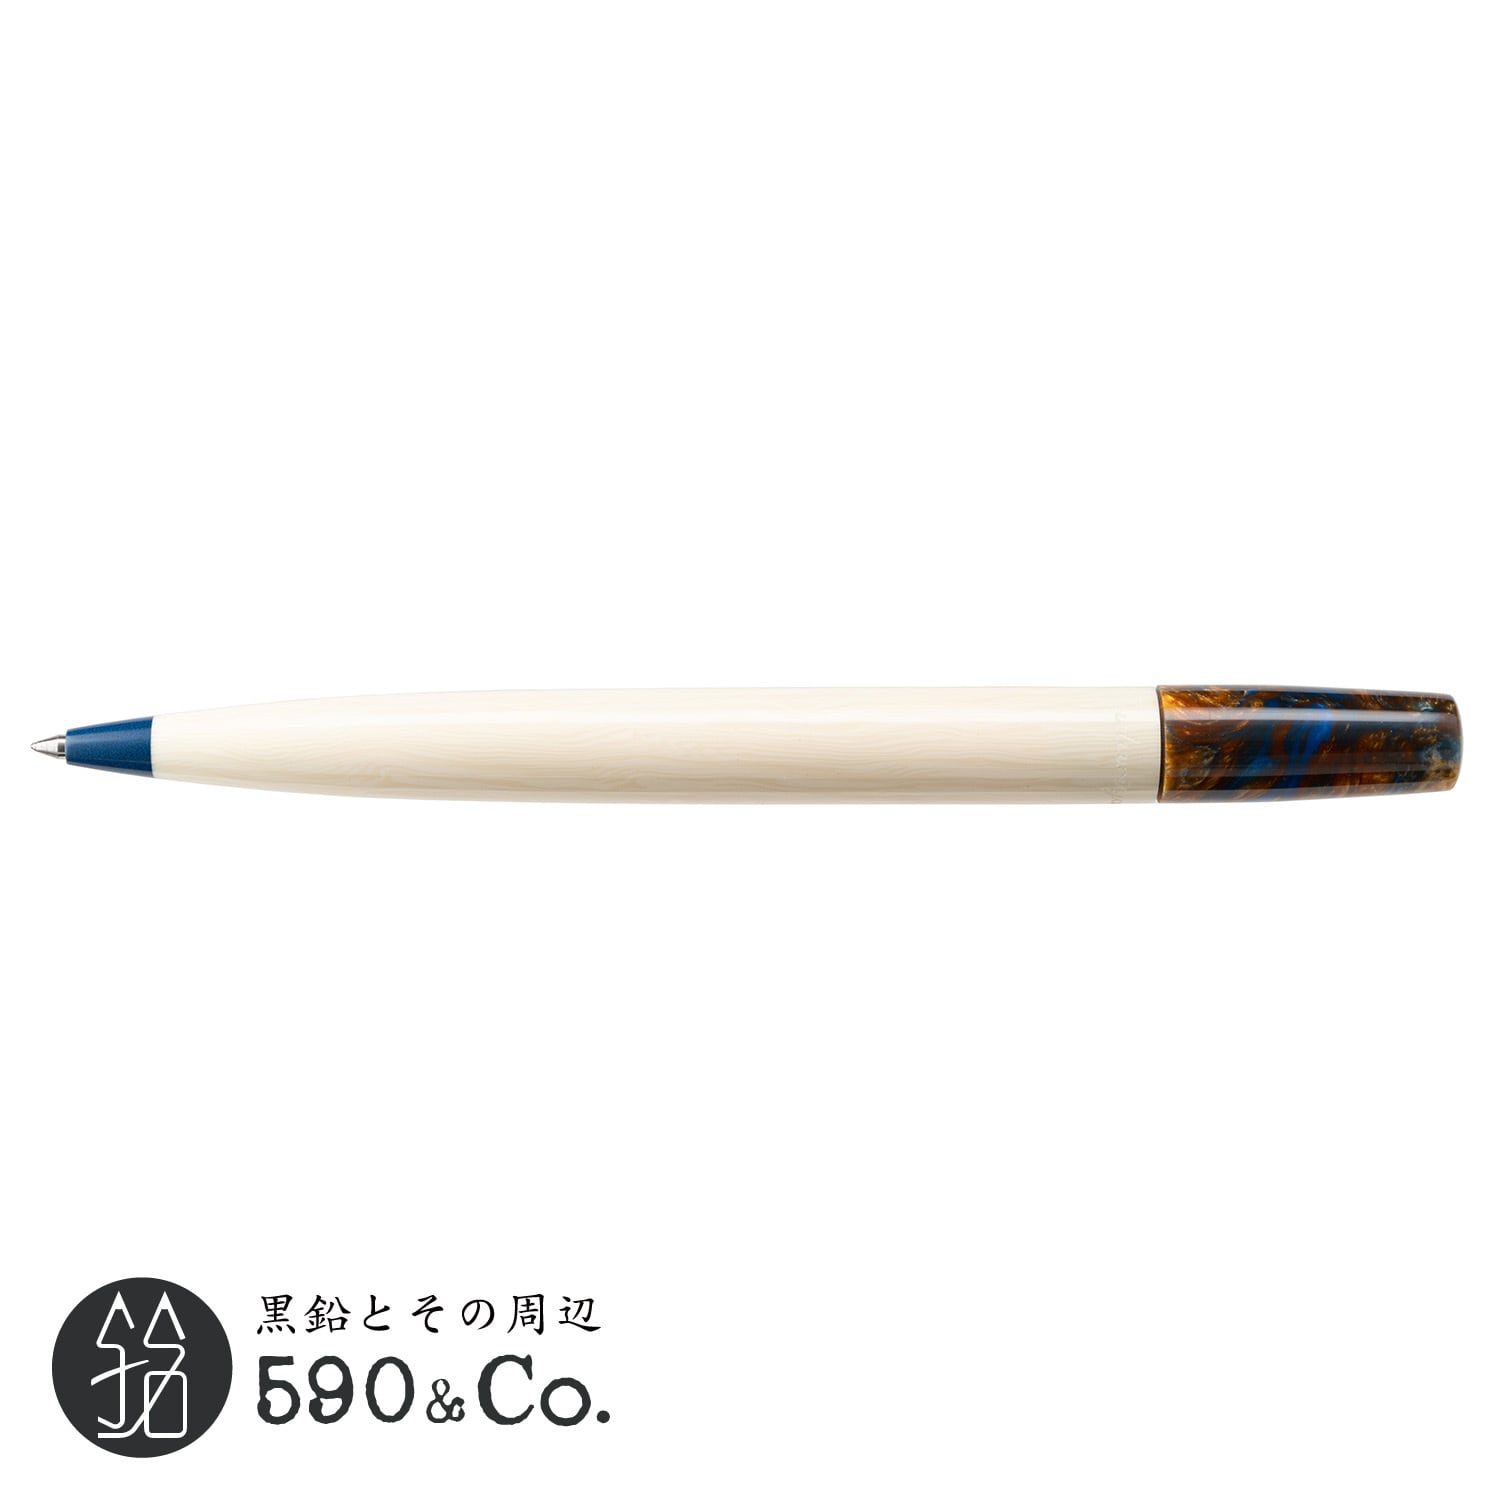 BLACKWING/ブラックウィング】 x Independent Bookstore Day | 590&Co.